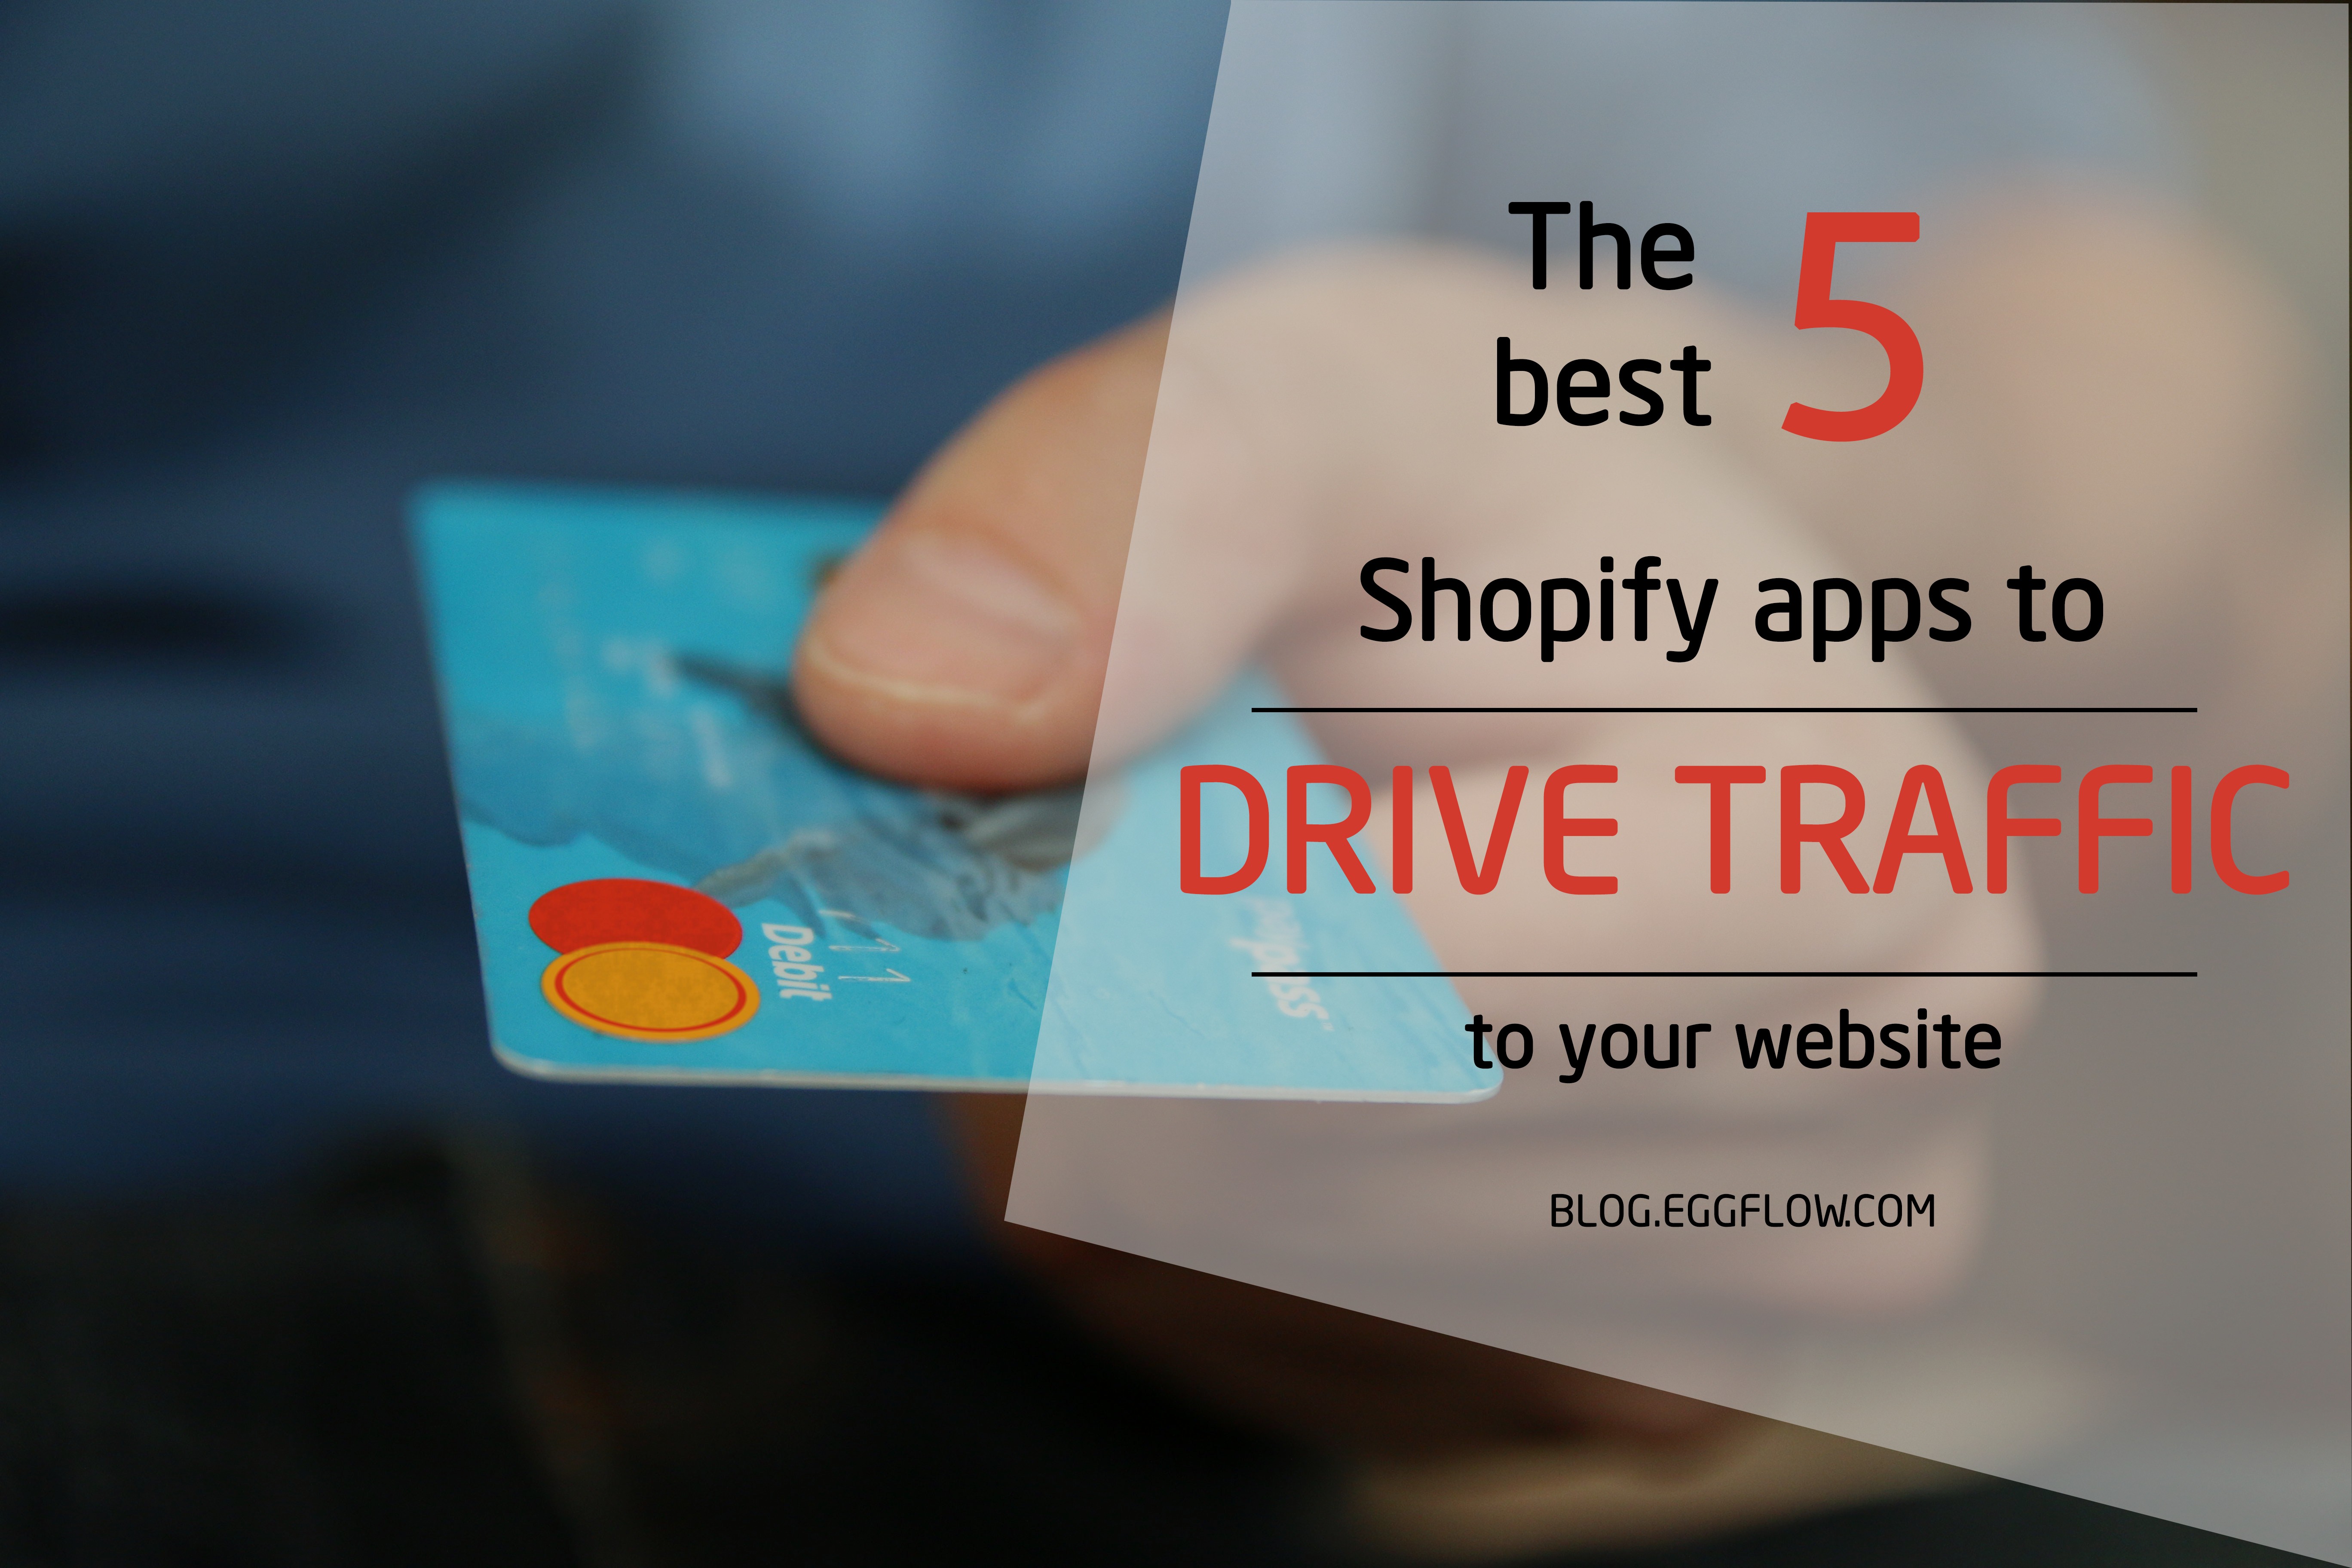 The best 5 Shopify traffic apps to drive traffic to your website